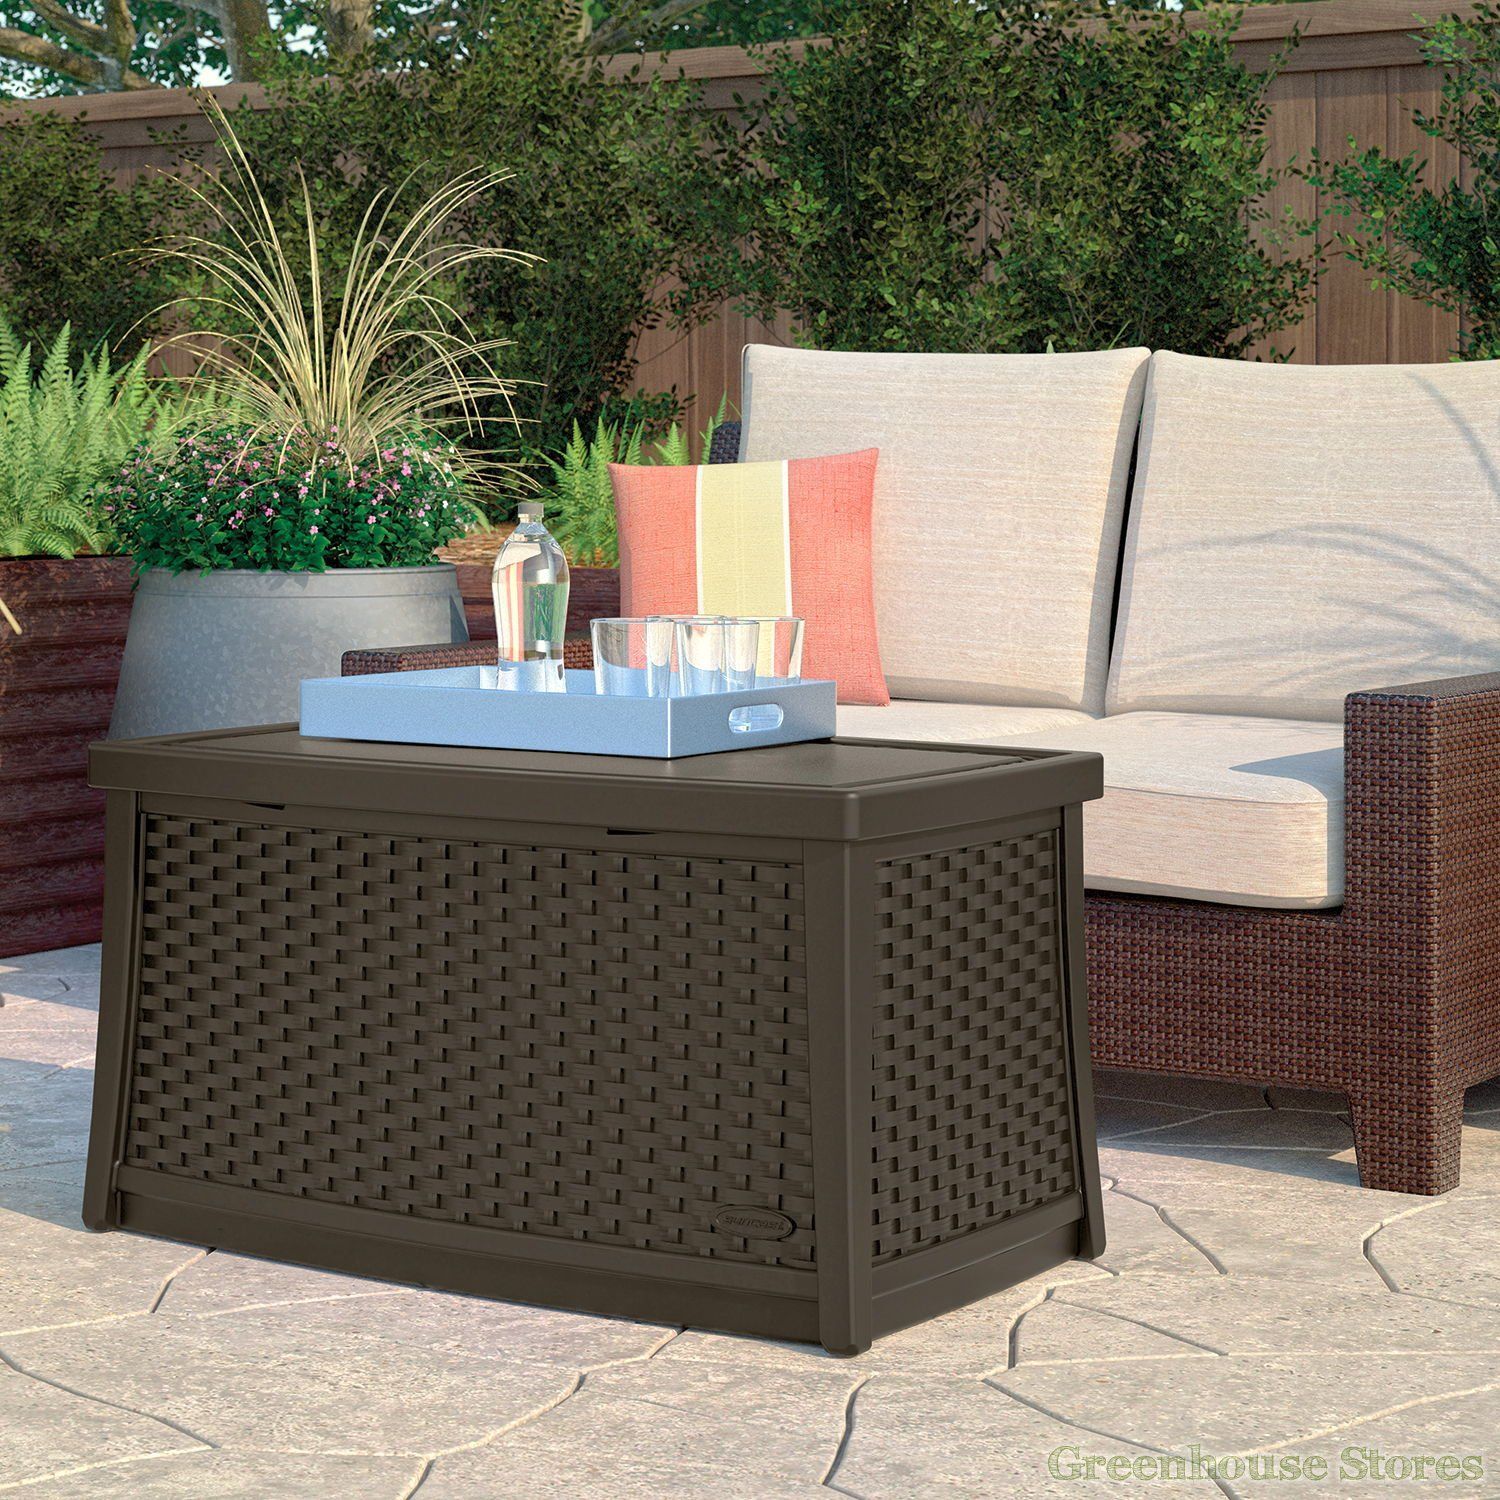 Suncast Coffee Table With Storage Box | Outdoor Coffee Tables, Coffee Regarding Outdoor Coffee Tables With Storage (Gallery 7 of 20)